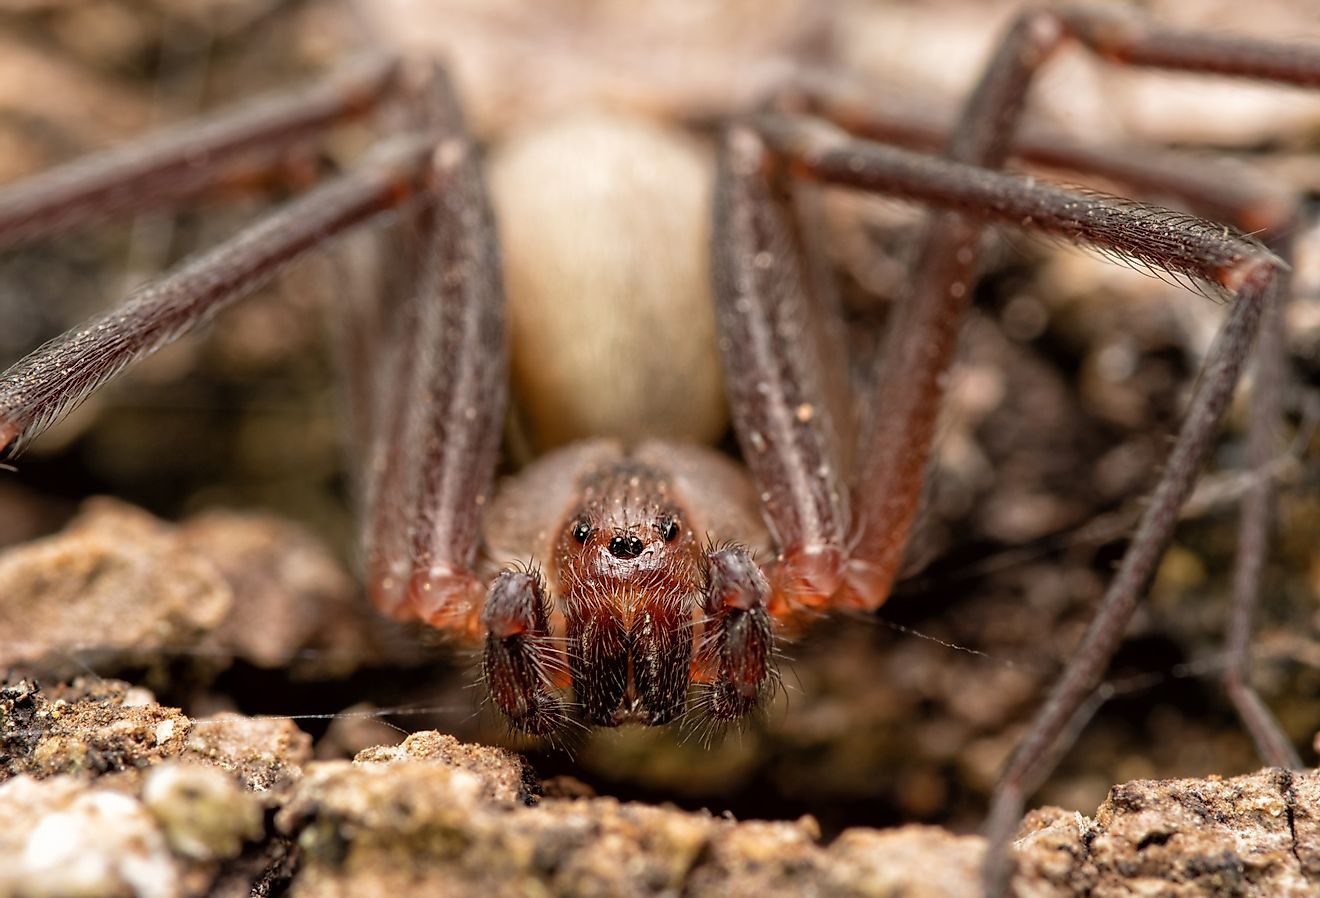 Front closeup of a Brown Recluse spider.